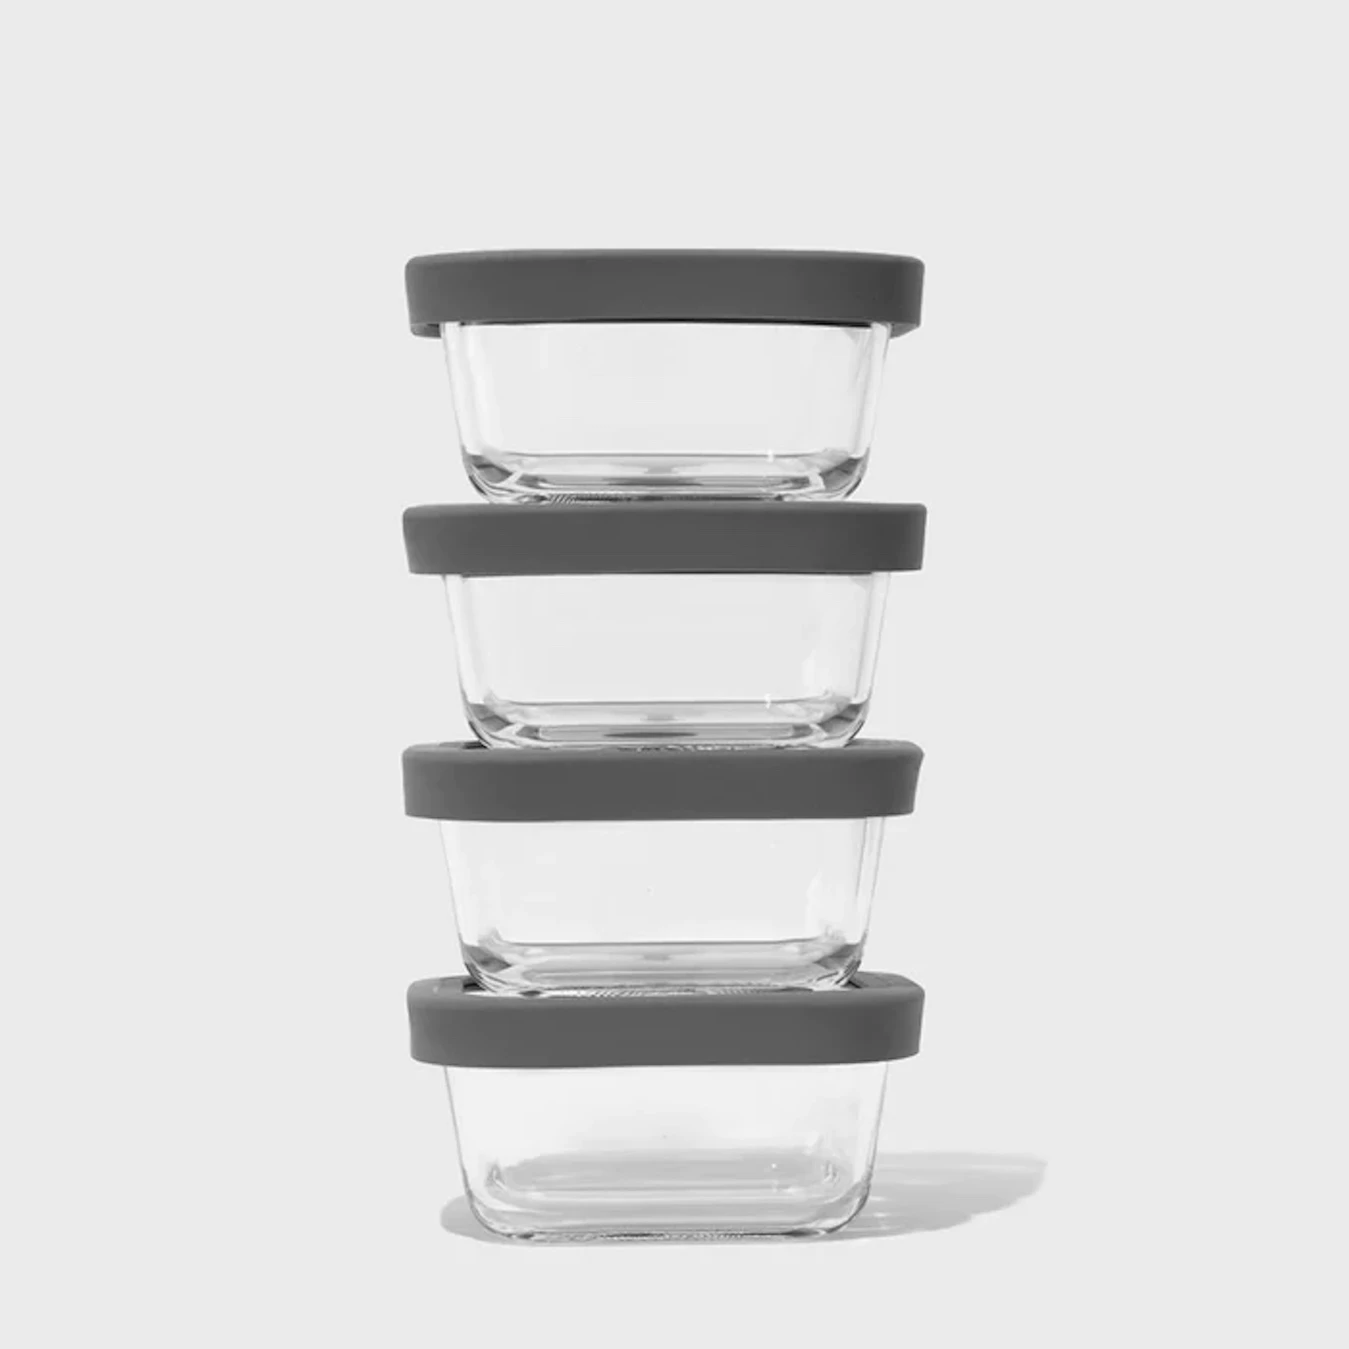 Four clear food storage containers sit stacked on top of one another.